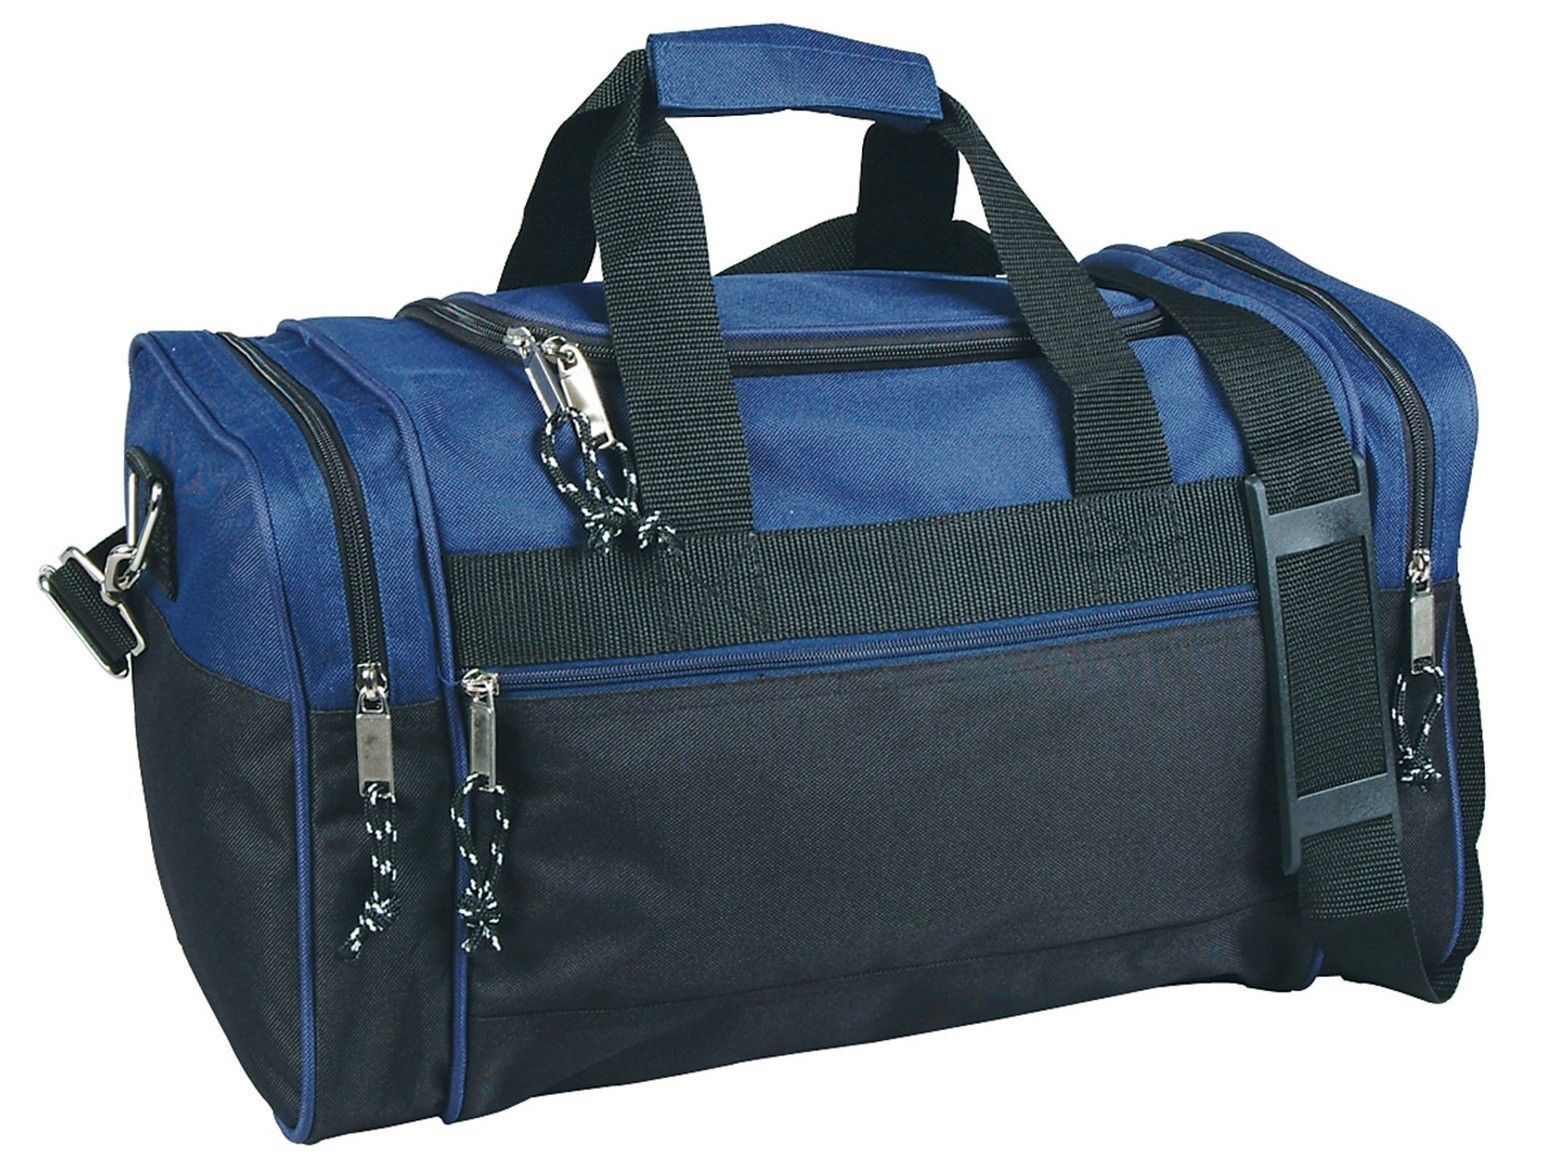 19" Sporty Gym Duffle Bag - Carry-on Travel Luggage